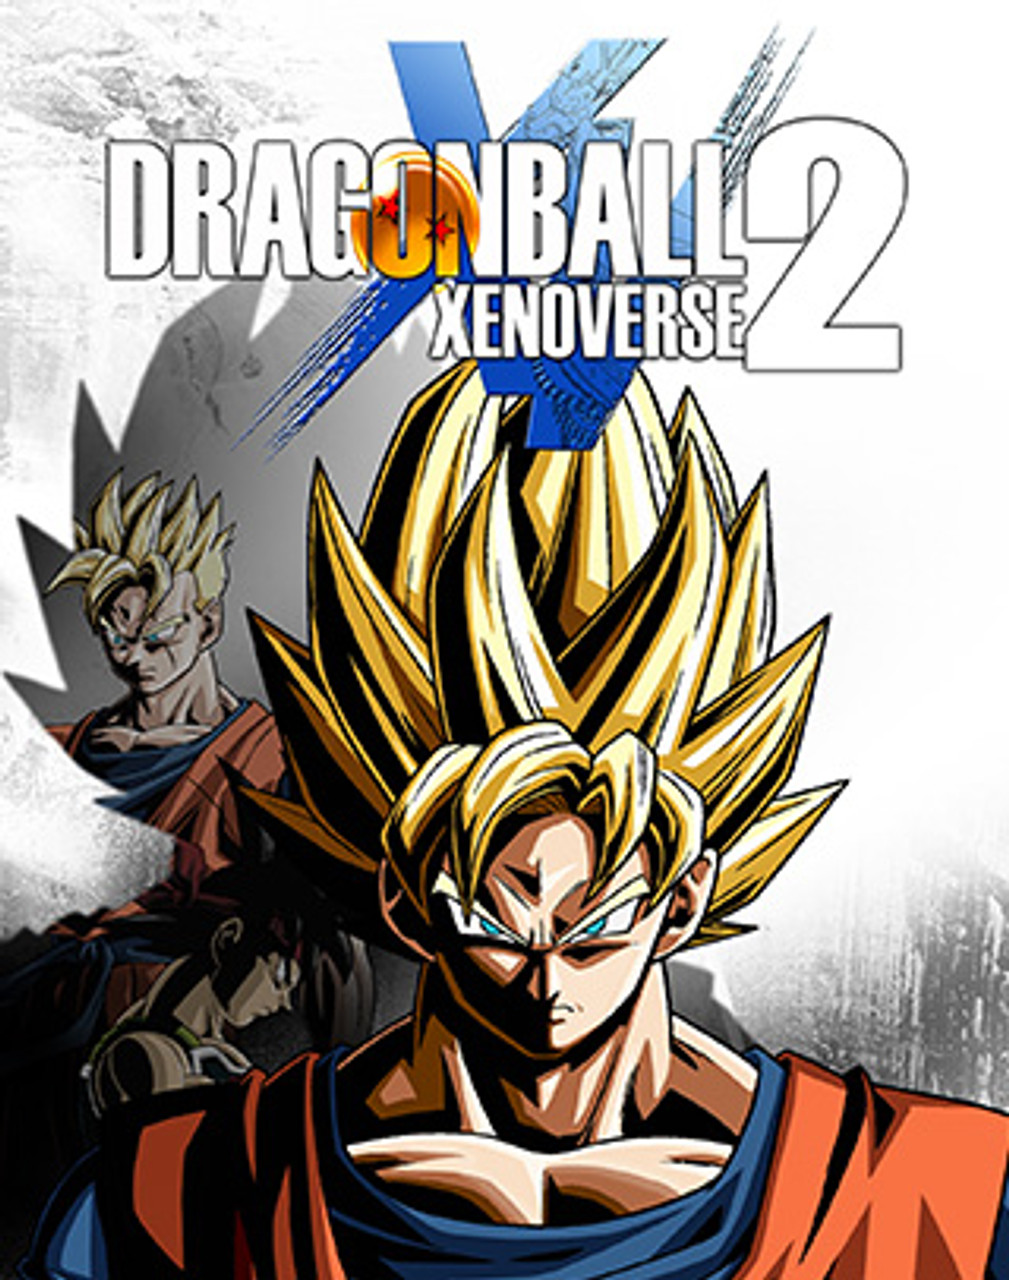 Dragonball Xenoverse 2 Cheats, Tips, DLC, Wishes, Game Download Guide  Unofficial eBook by The Yuw - EPUB Book